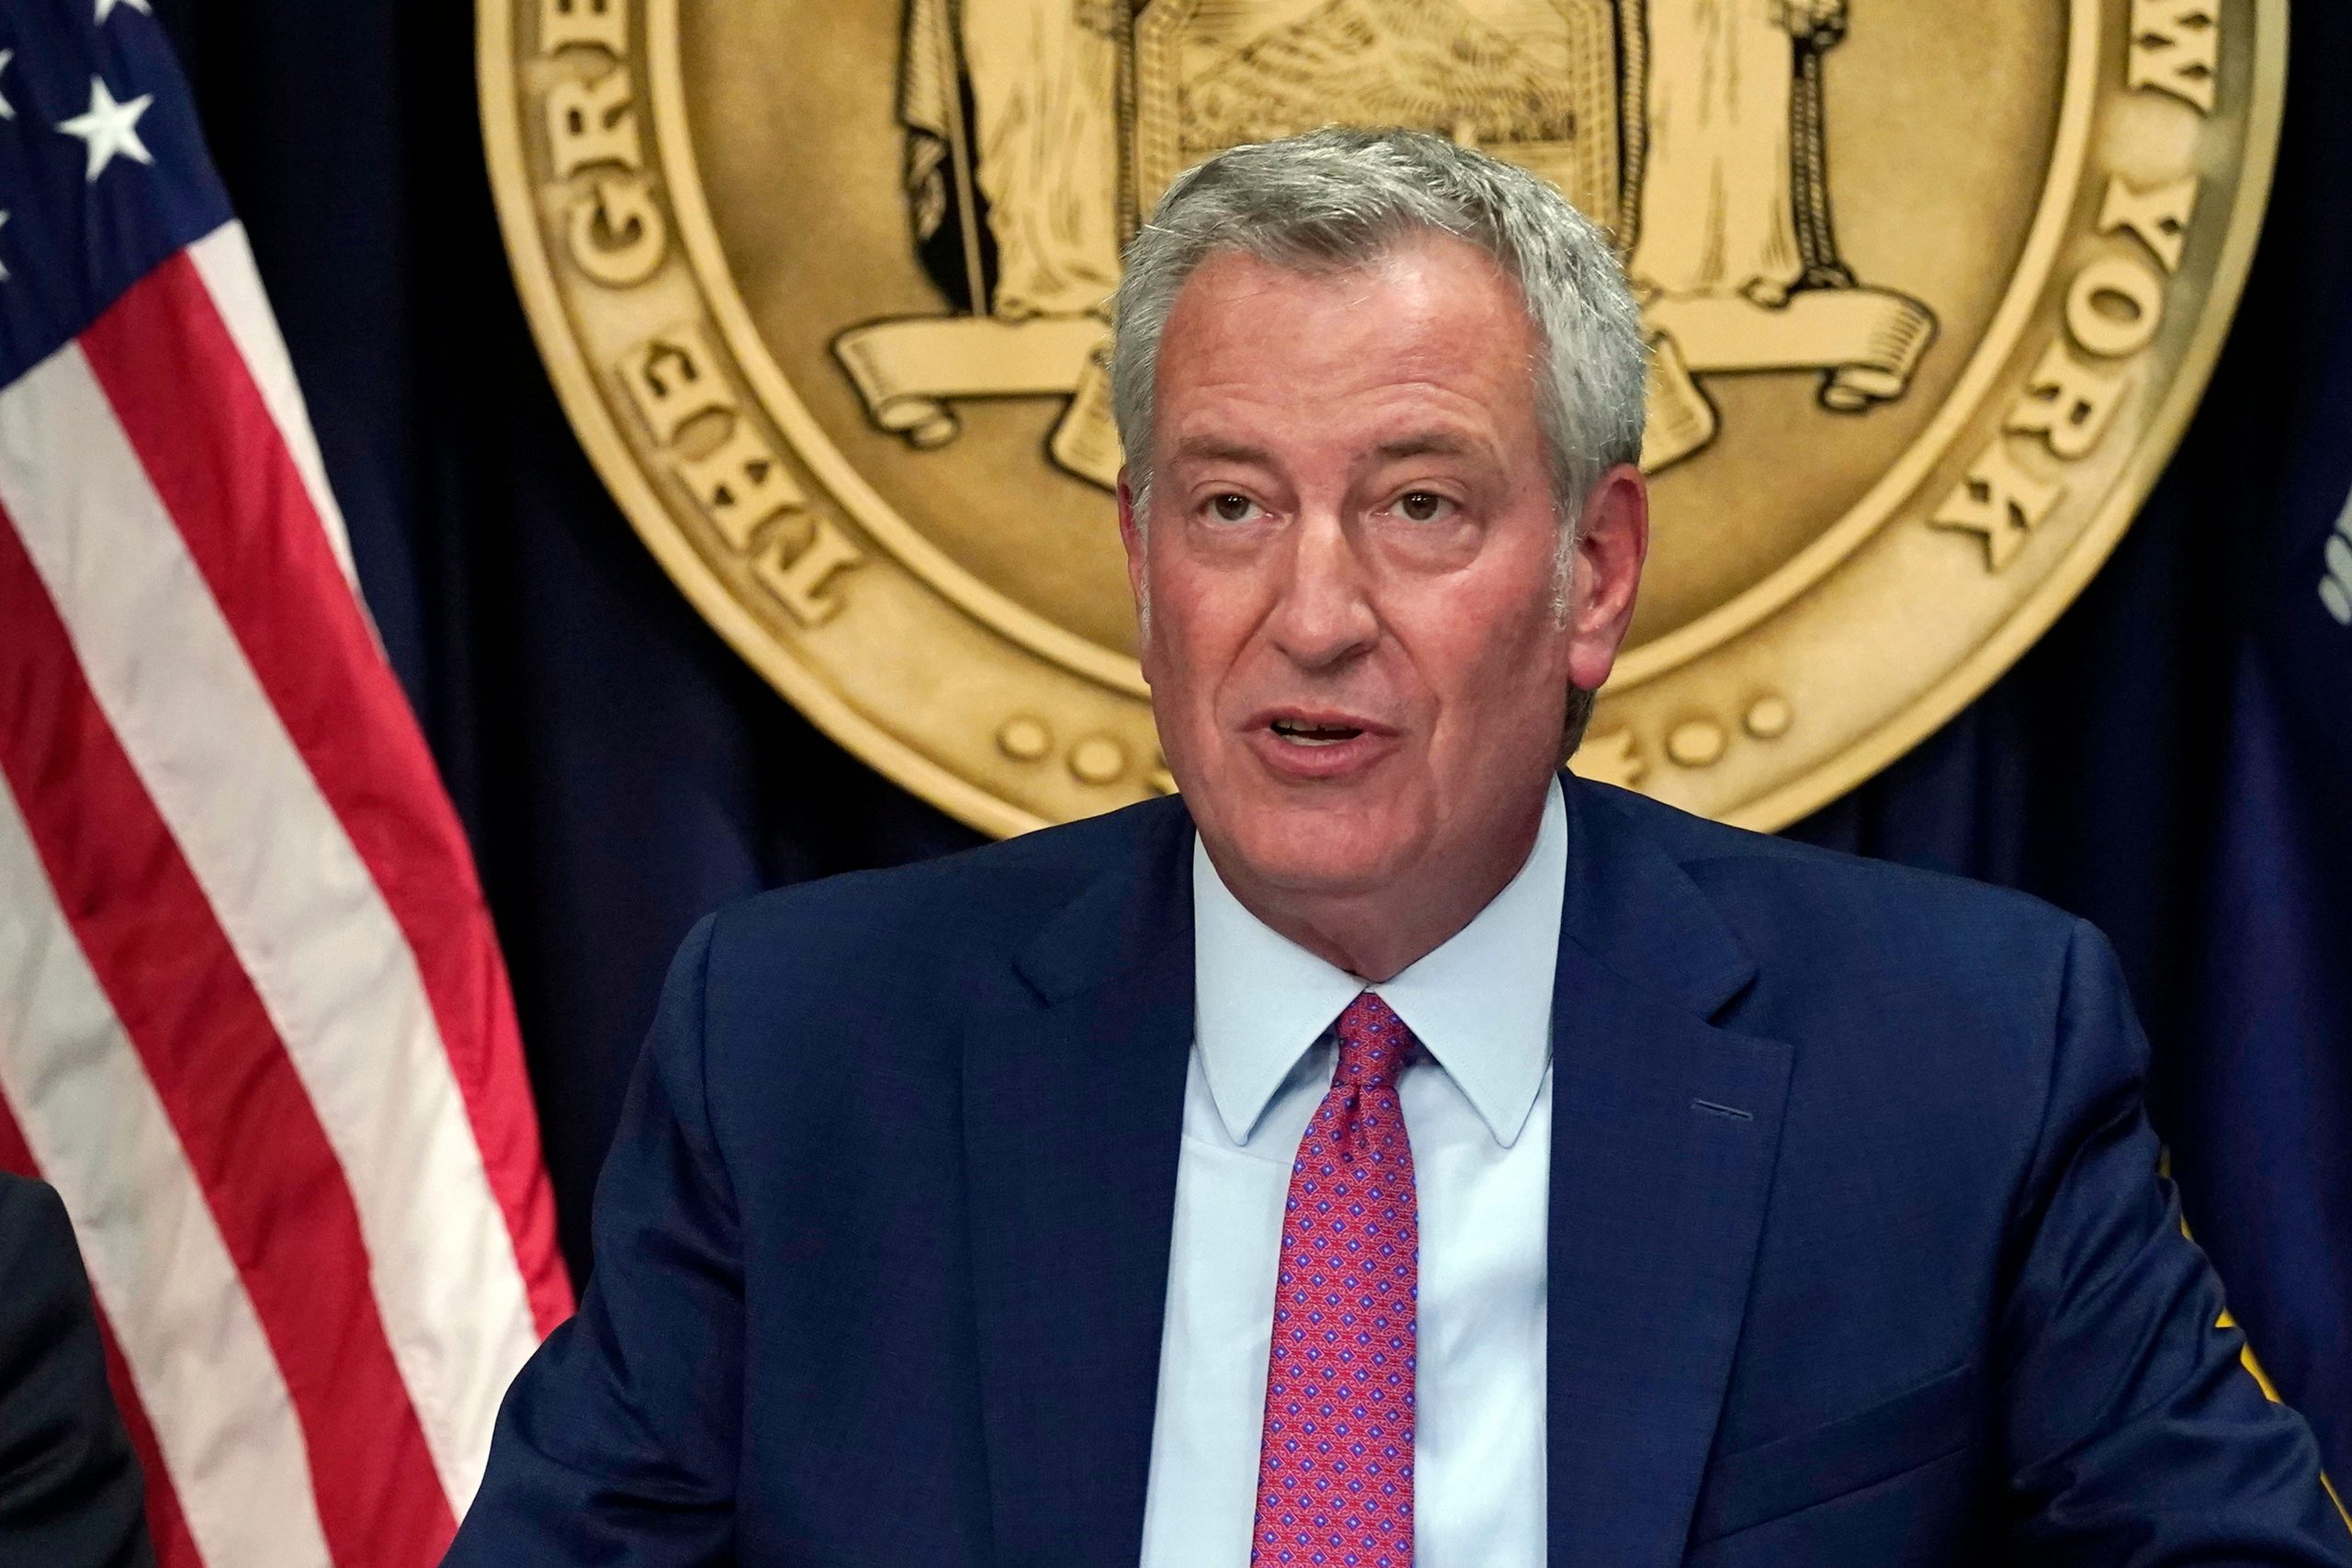 Why does former New York City Mayor Bill de Blasio not want to run for governor?